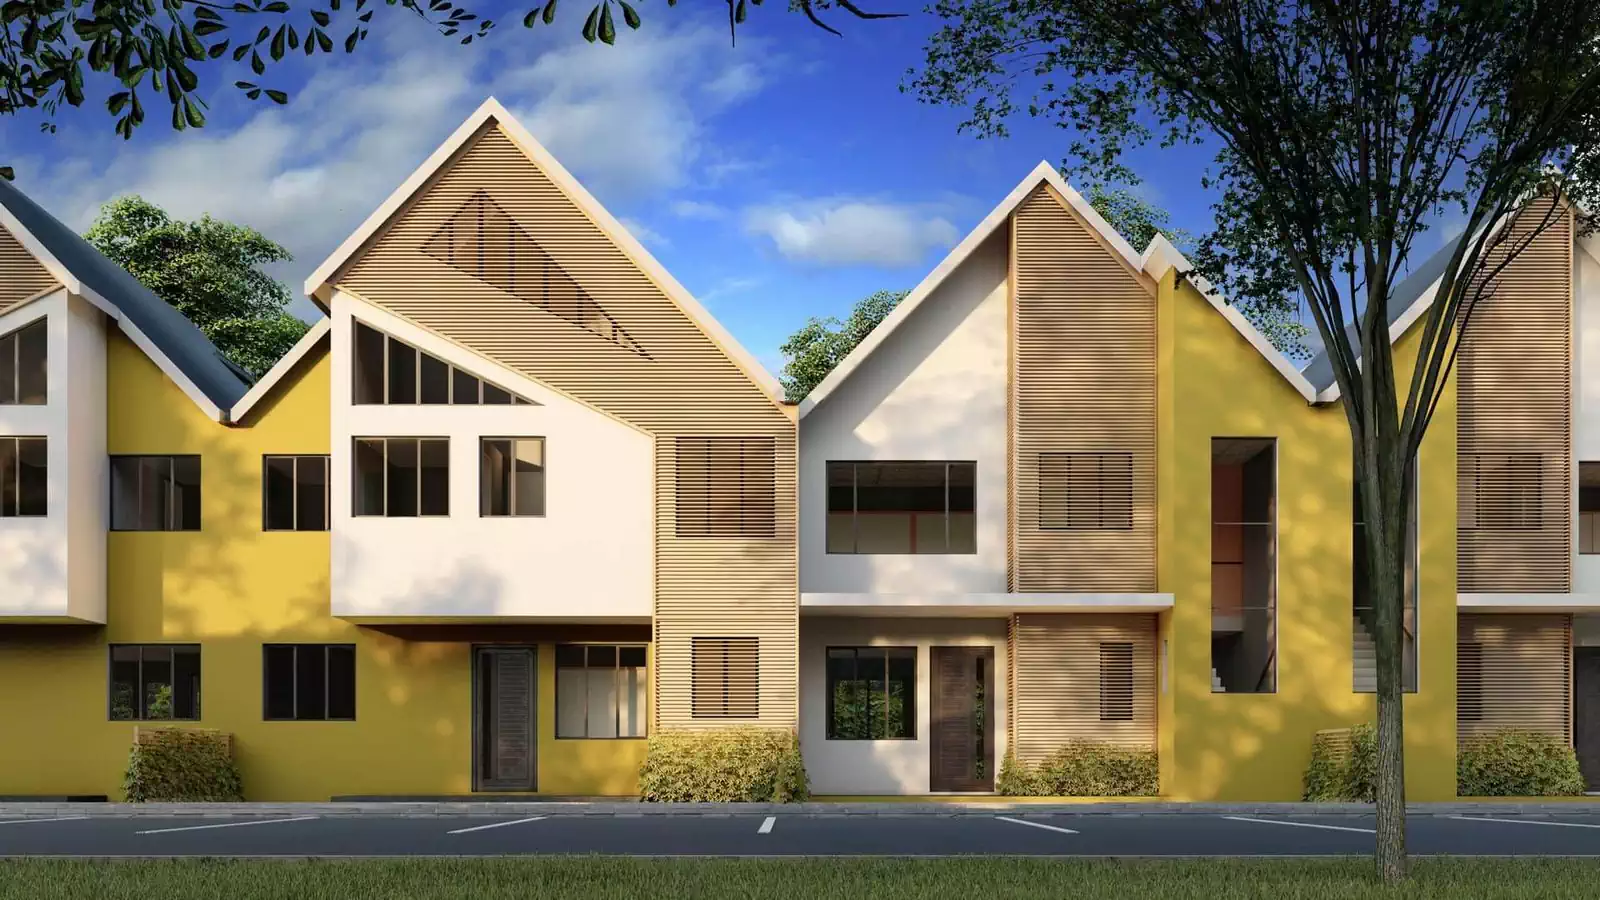 3 and 2 bedroom townhomes alternating to break repetition and monotony of town home designs